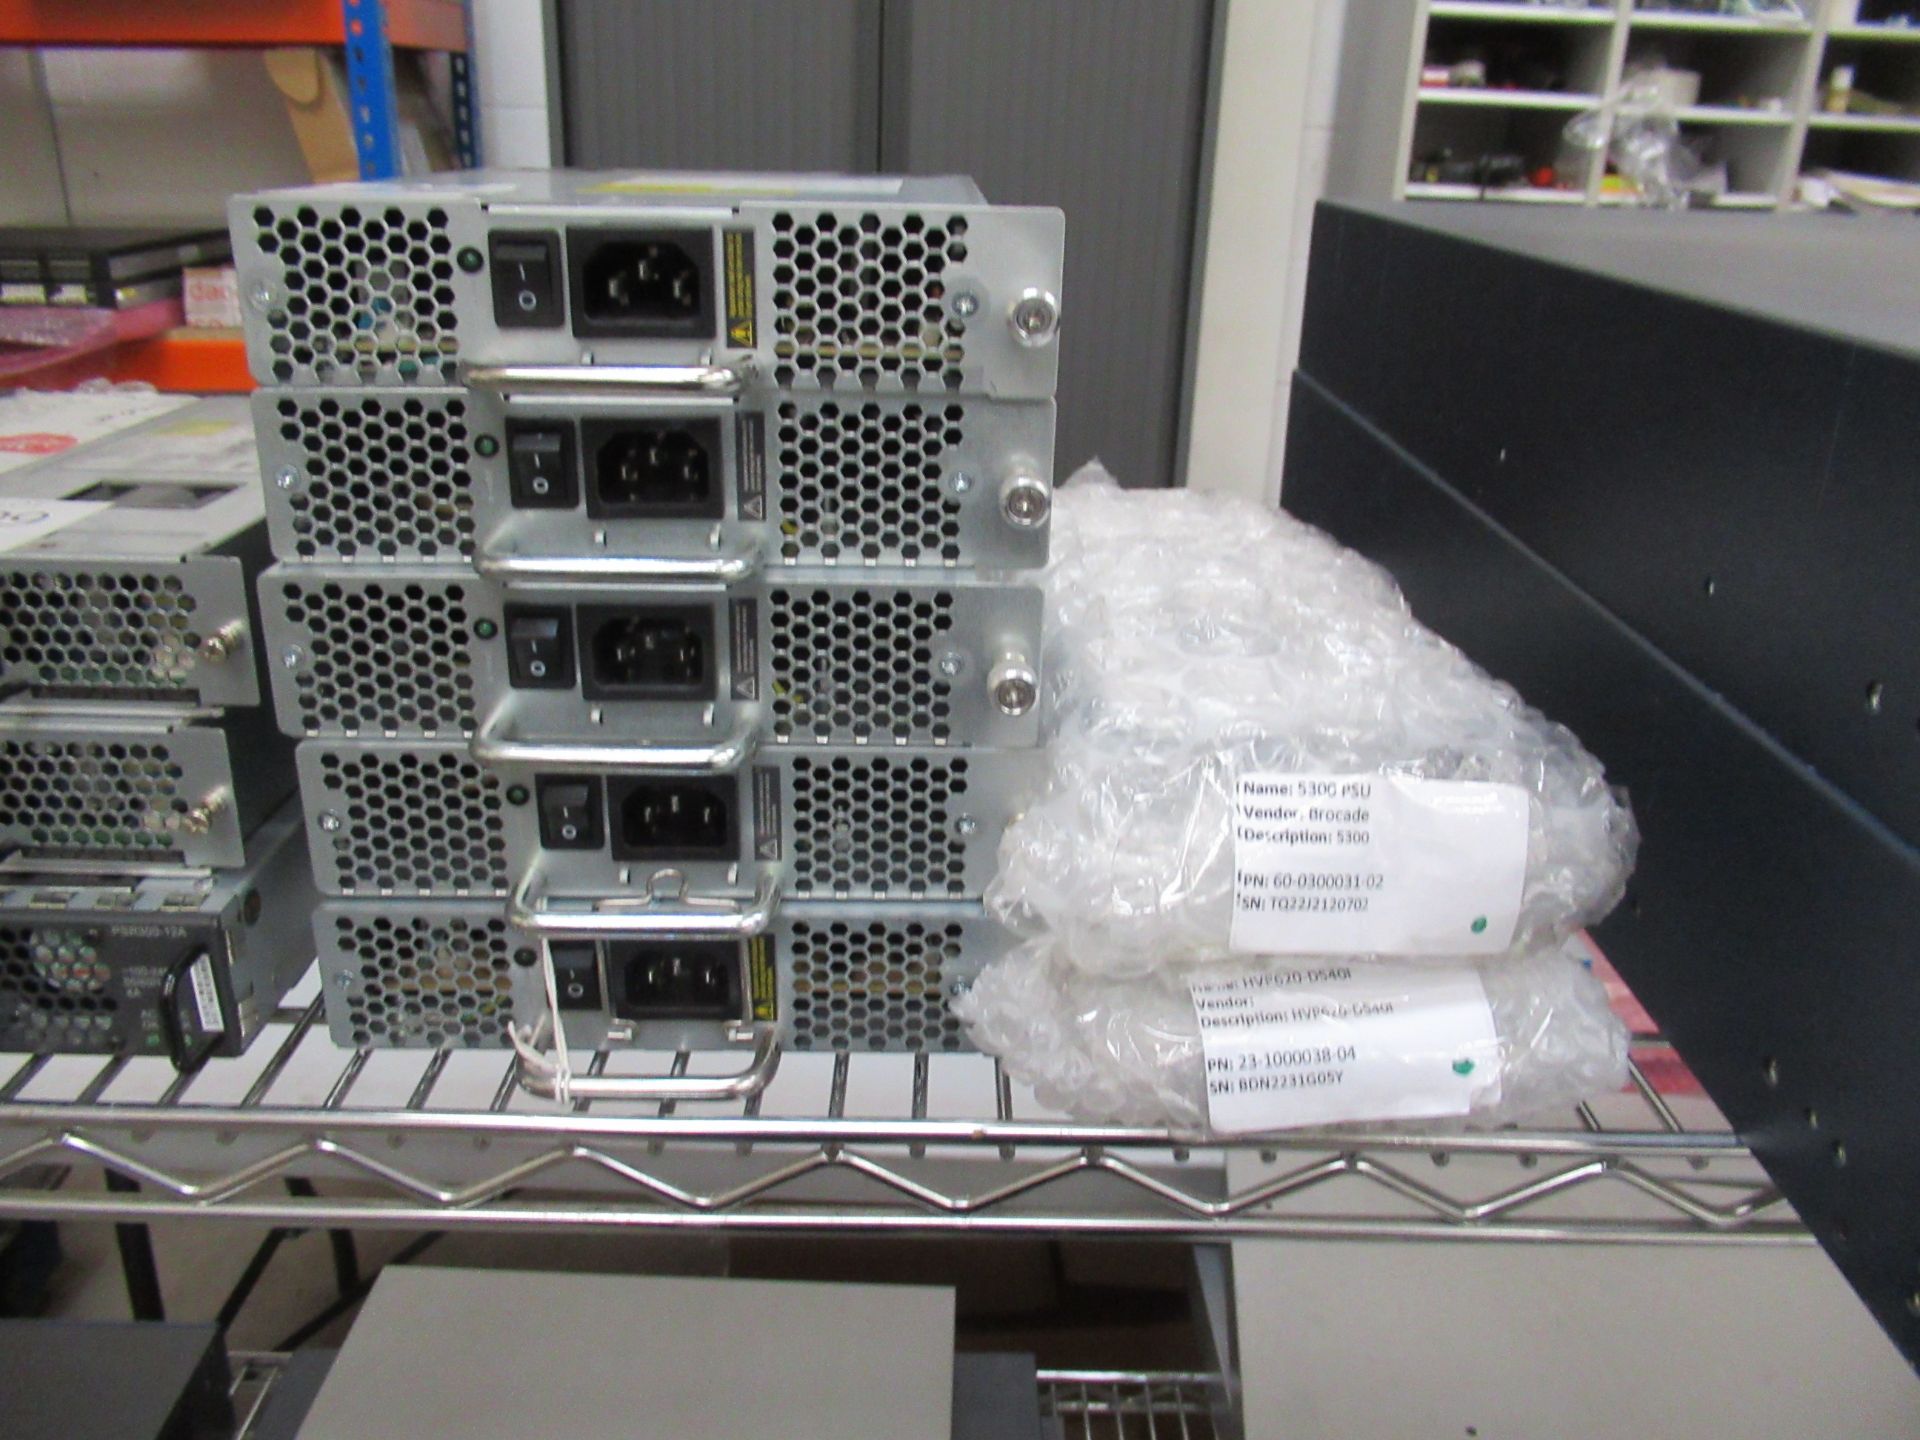 2 x Finisar Gigabit Trafic Tester in Cases and 1 x Finisar Fibre Channel Traffic Tester, Contents of - Image 48 of 48